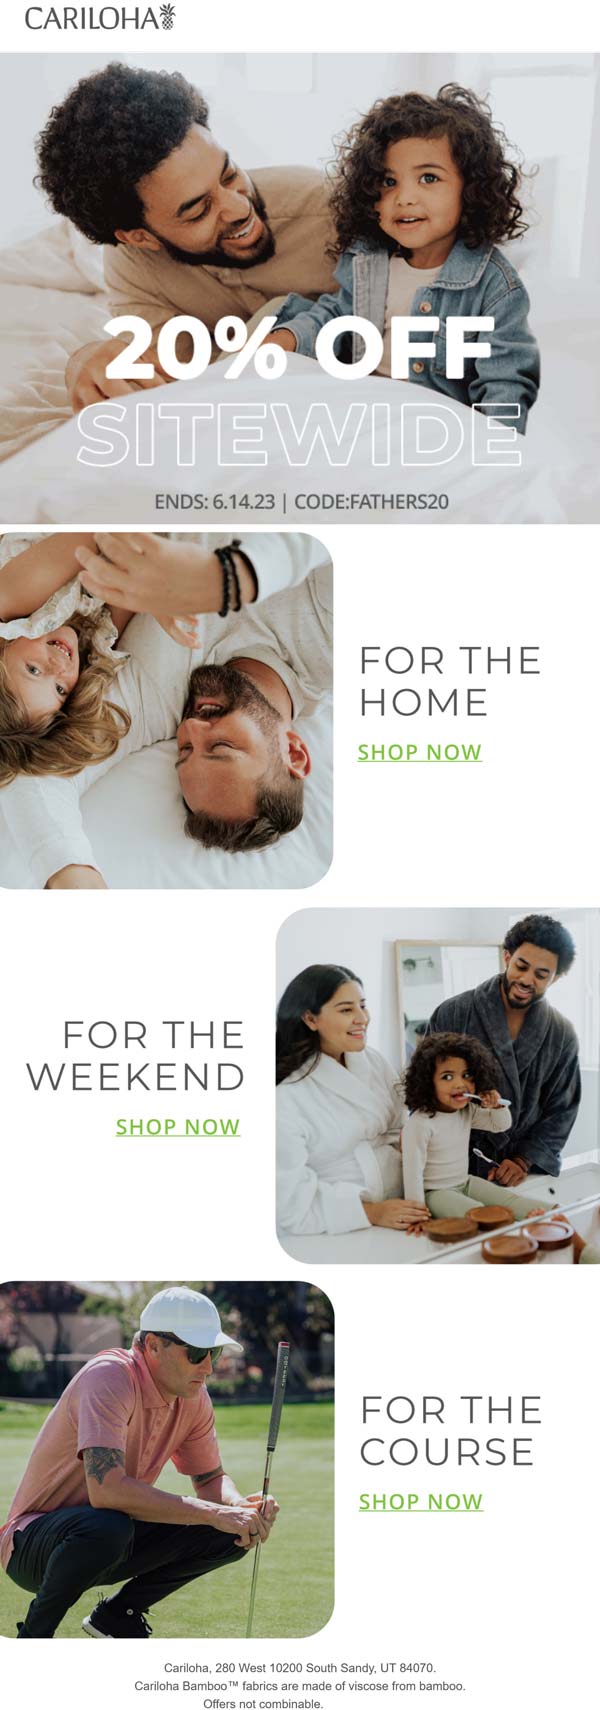 Cariloha stores Coupon  20% off everything online at Cariloha via promo code FATHERS20 #cariloha 